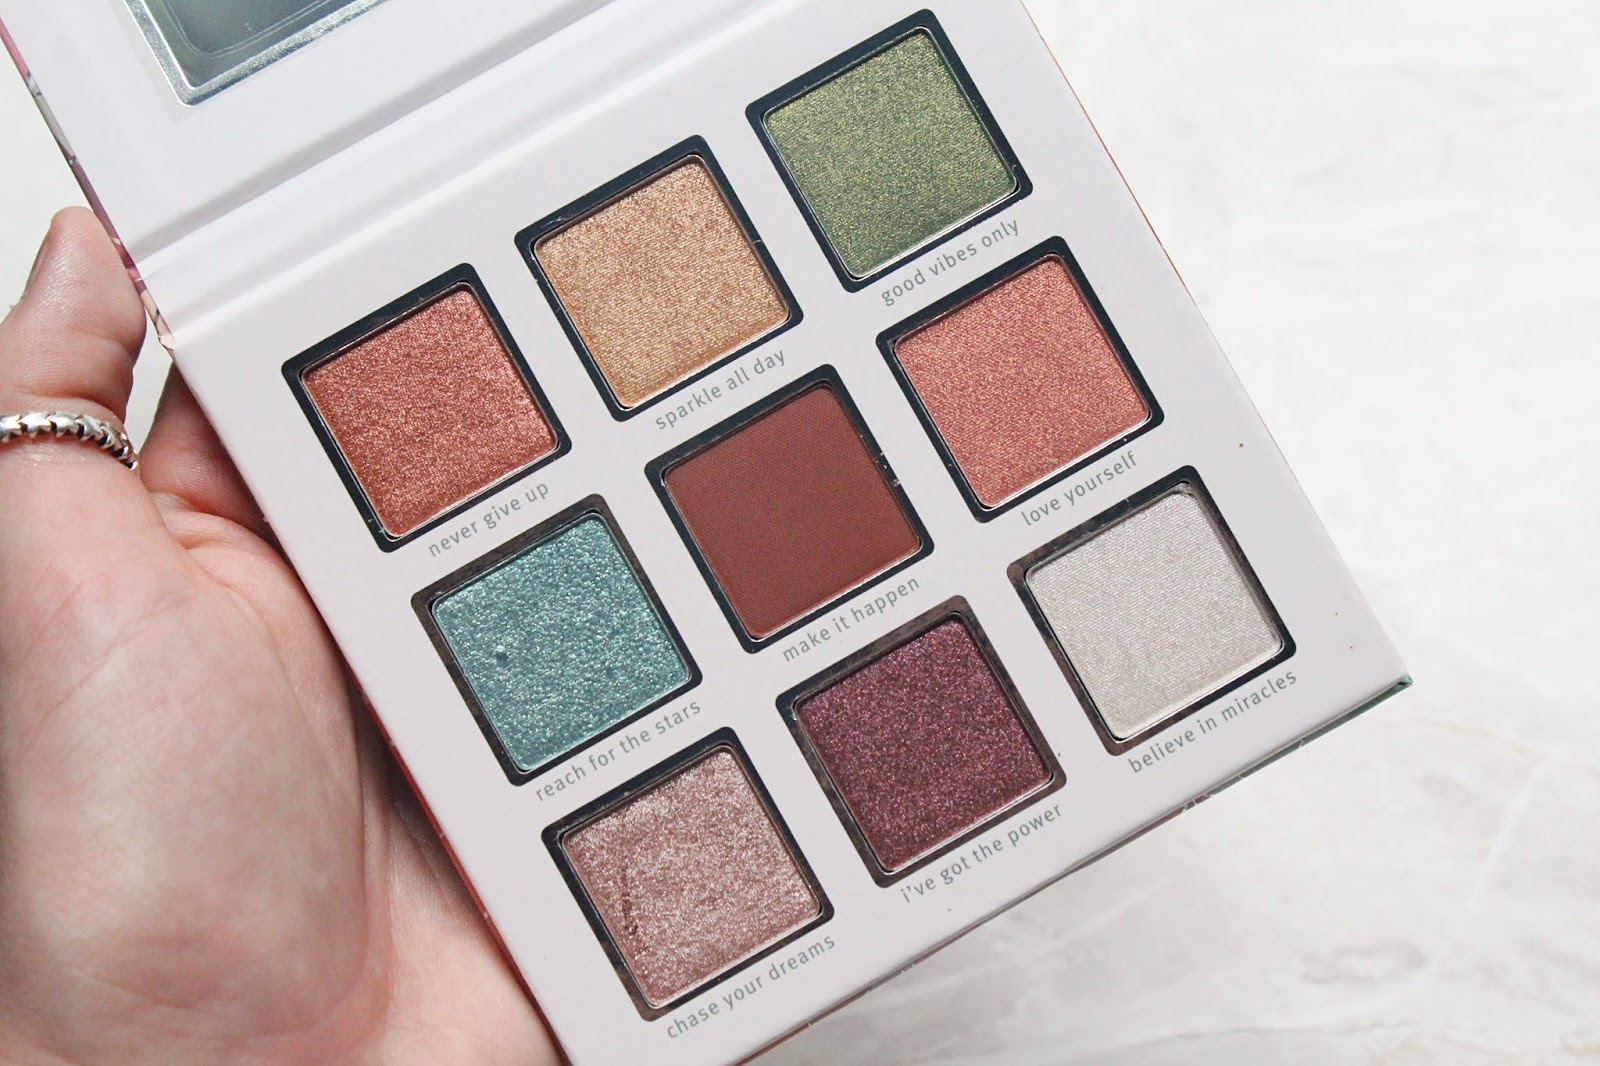 There are two Crystal Power palettes, the Blush & Highlighter Palette a...